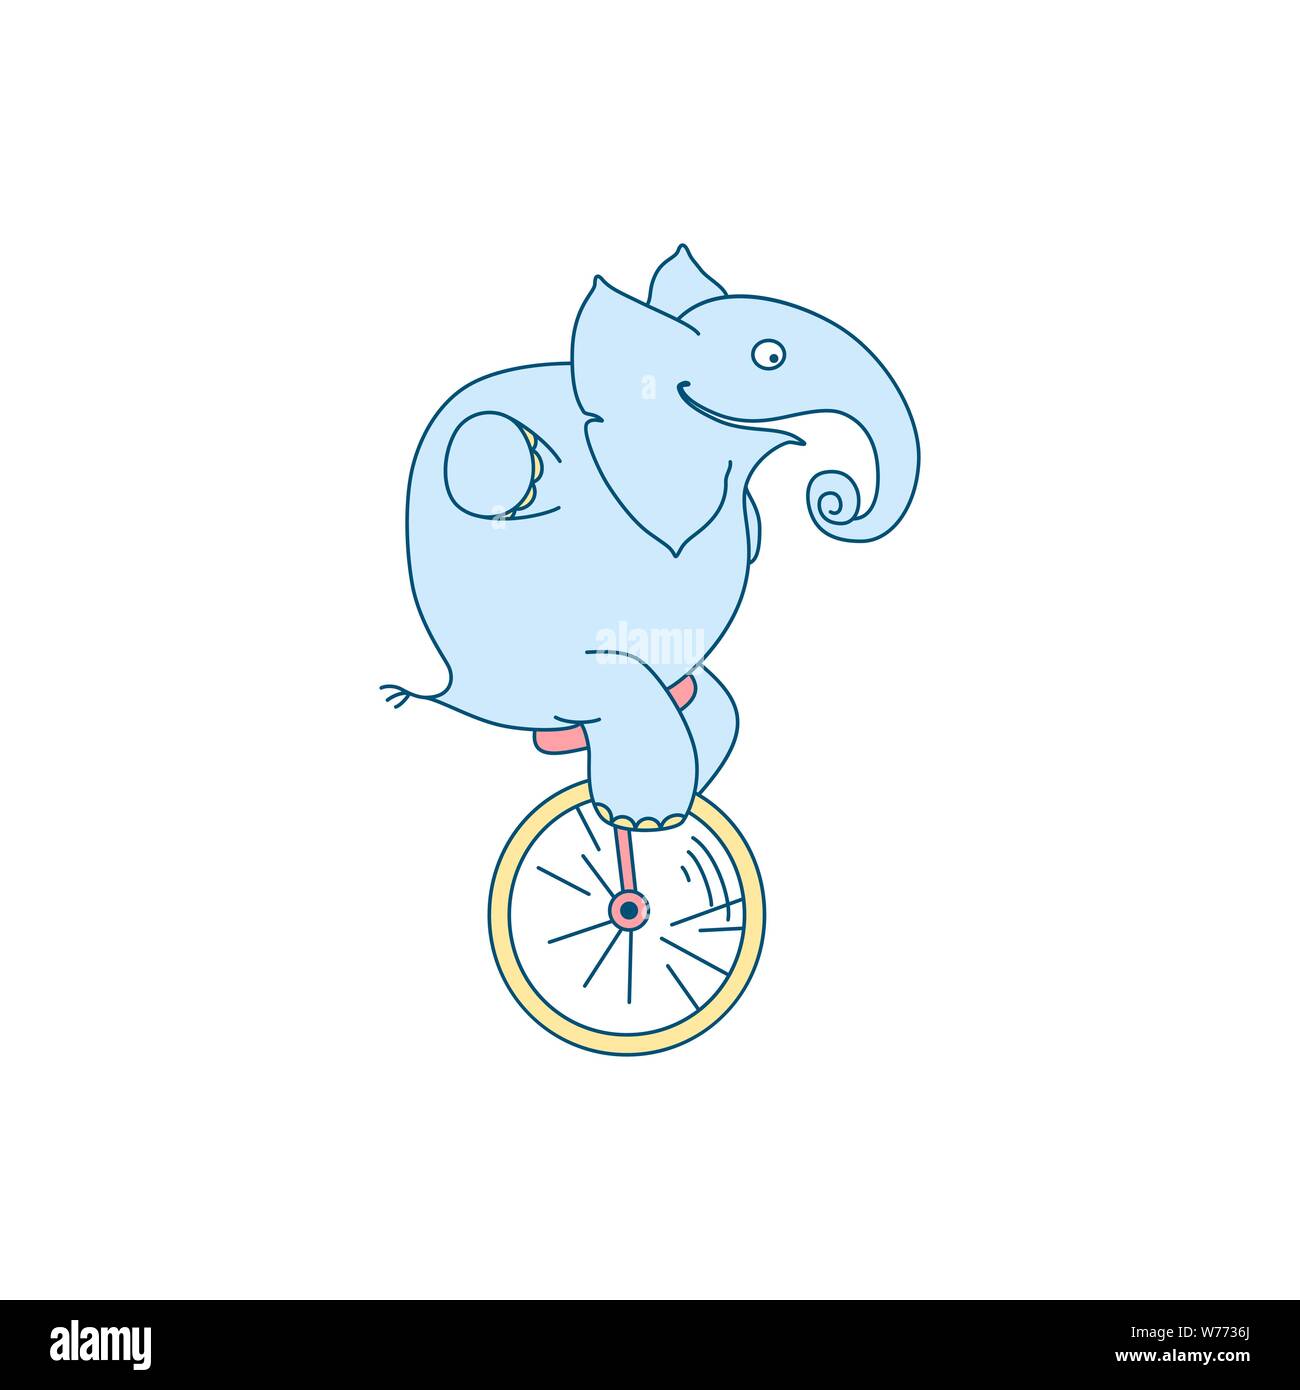 Vector illustration of cute cartoon elephant clown on unicycle. Cheerful character Stock Vector